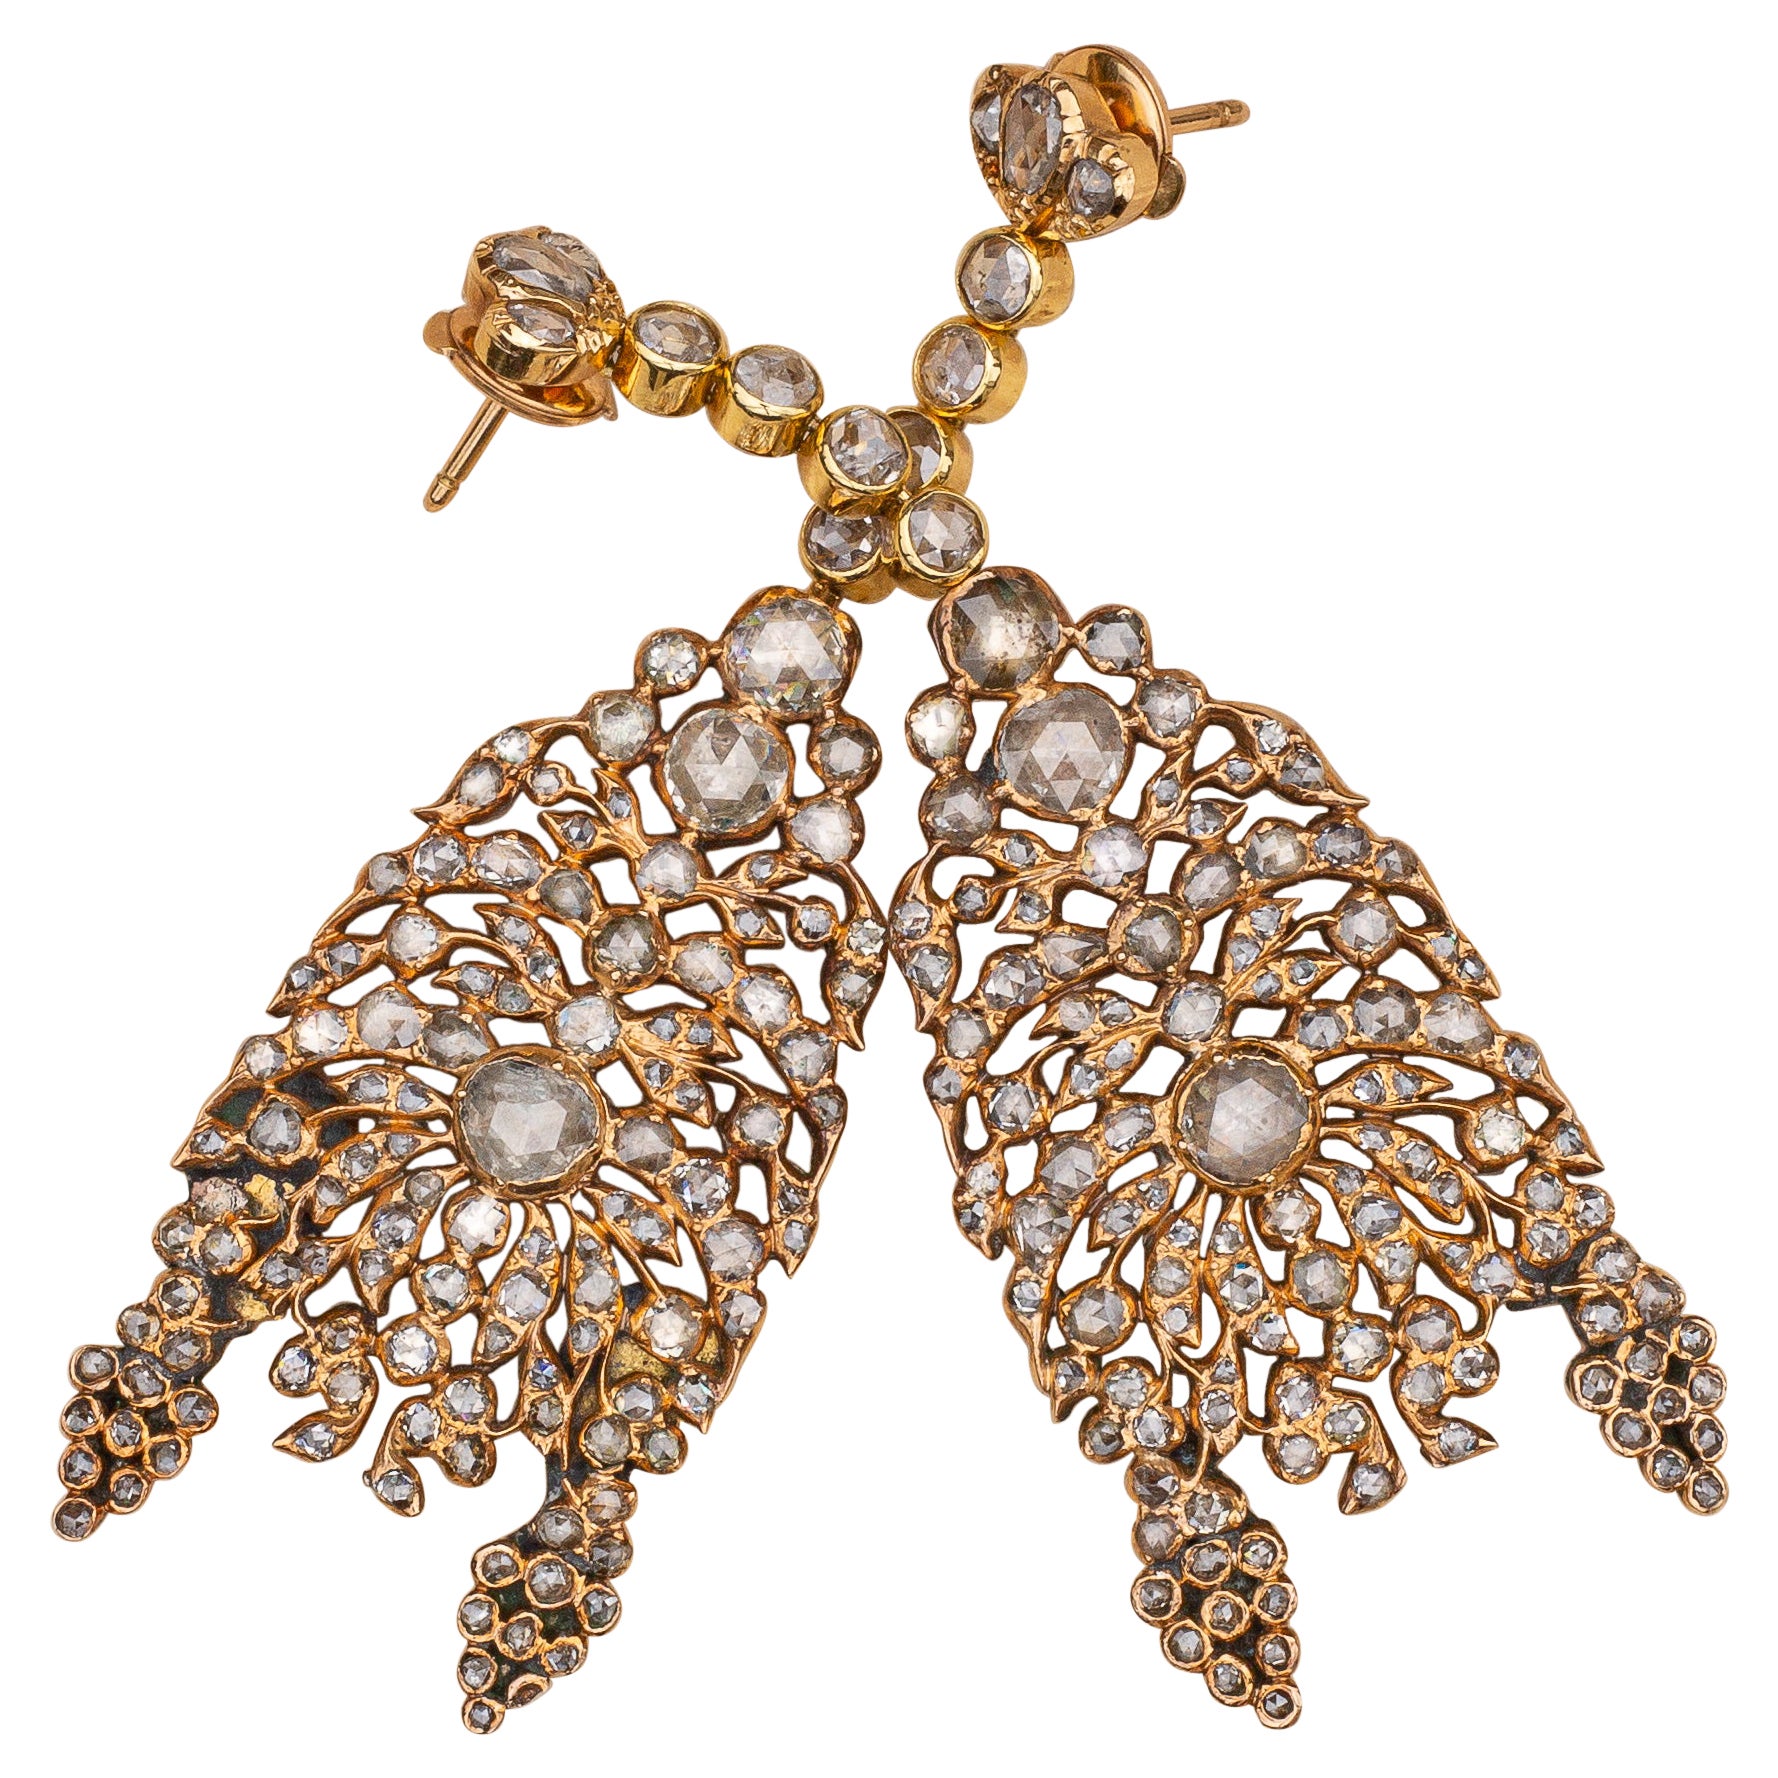 A spectacular pair of diamond chandelier earrings dating to the early 19th century. Each earring features 122 rose cut diamonds of varying sizes (244 in total) in rub over and closed back gold settings, weighing approximately 4ctw. 

These elegant